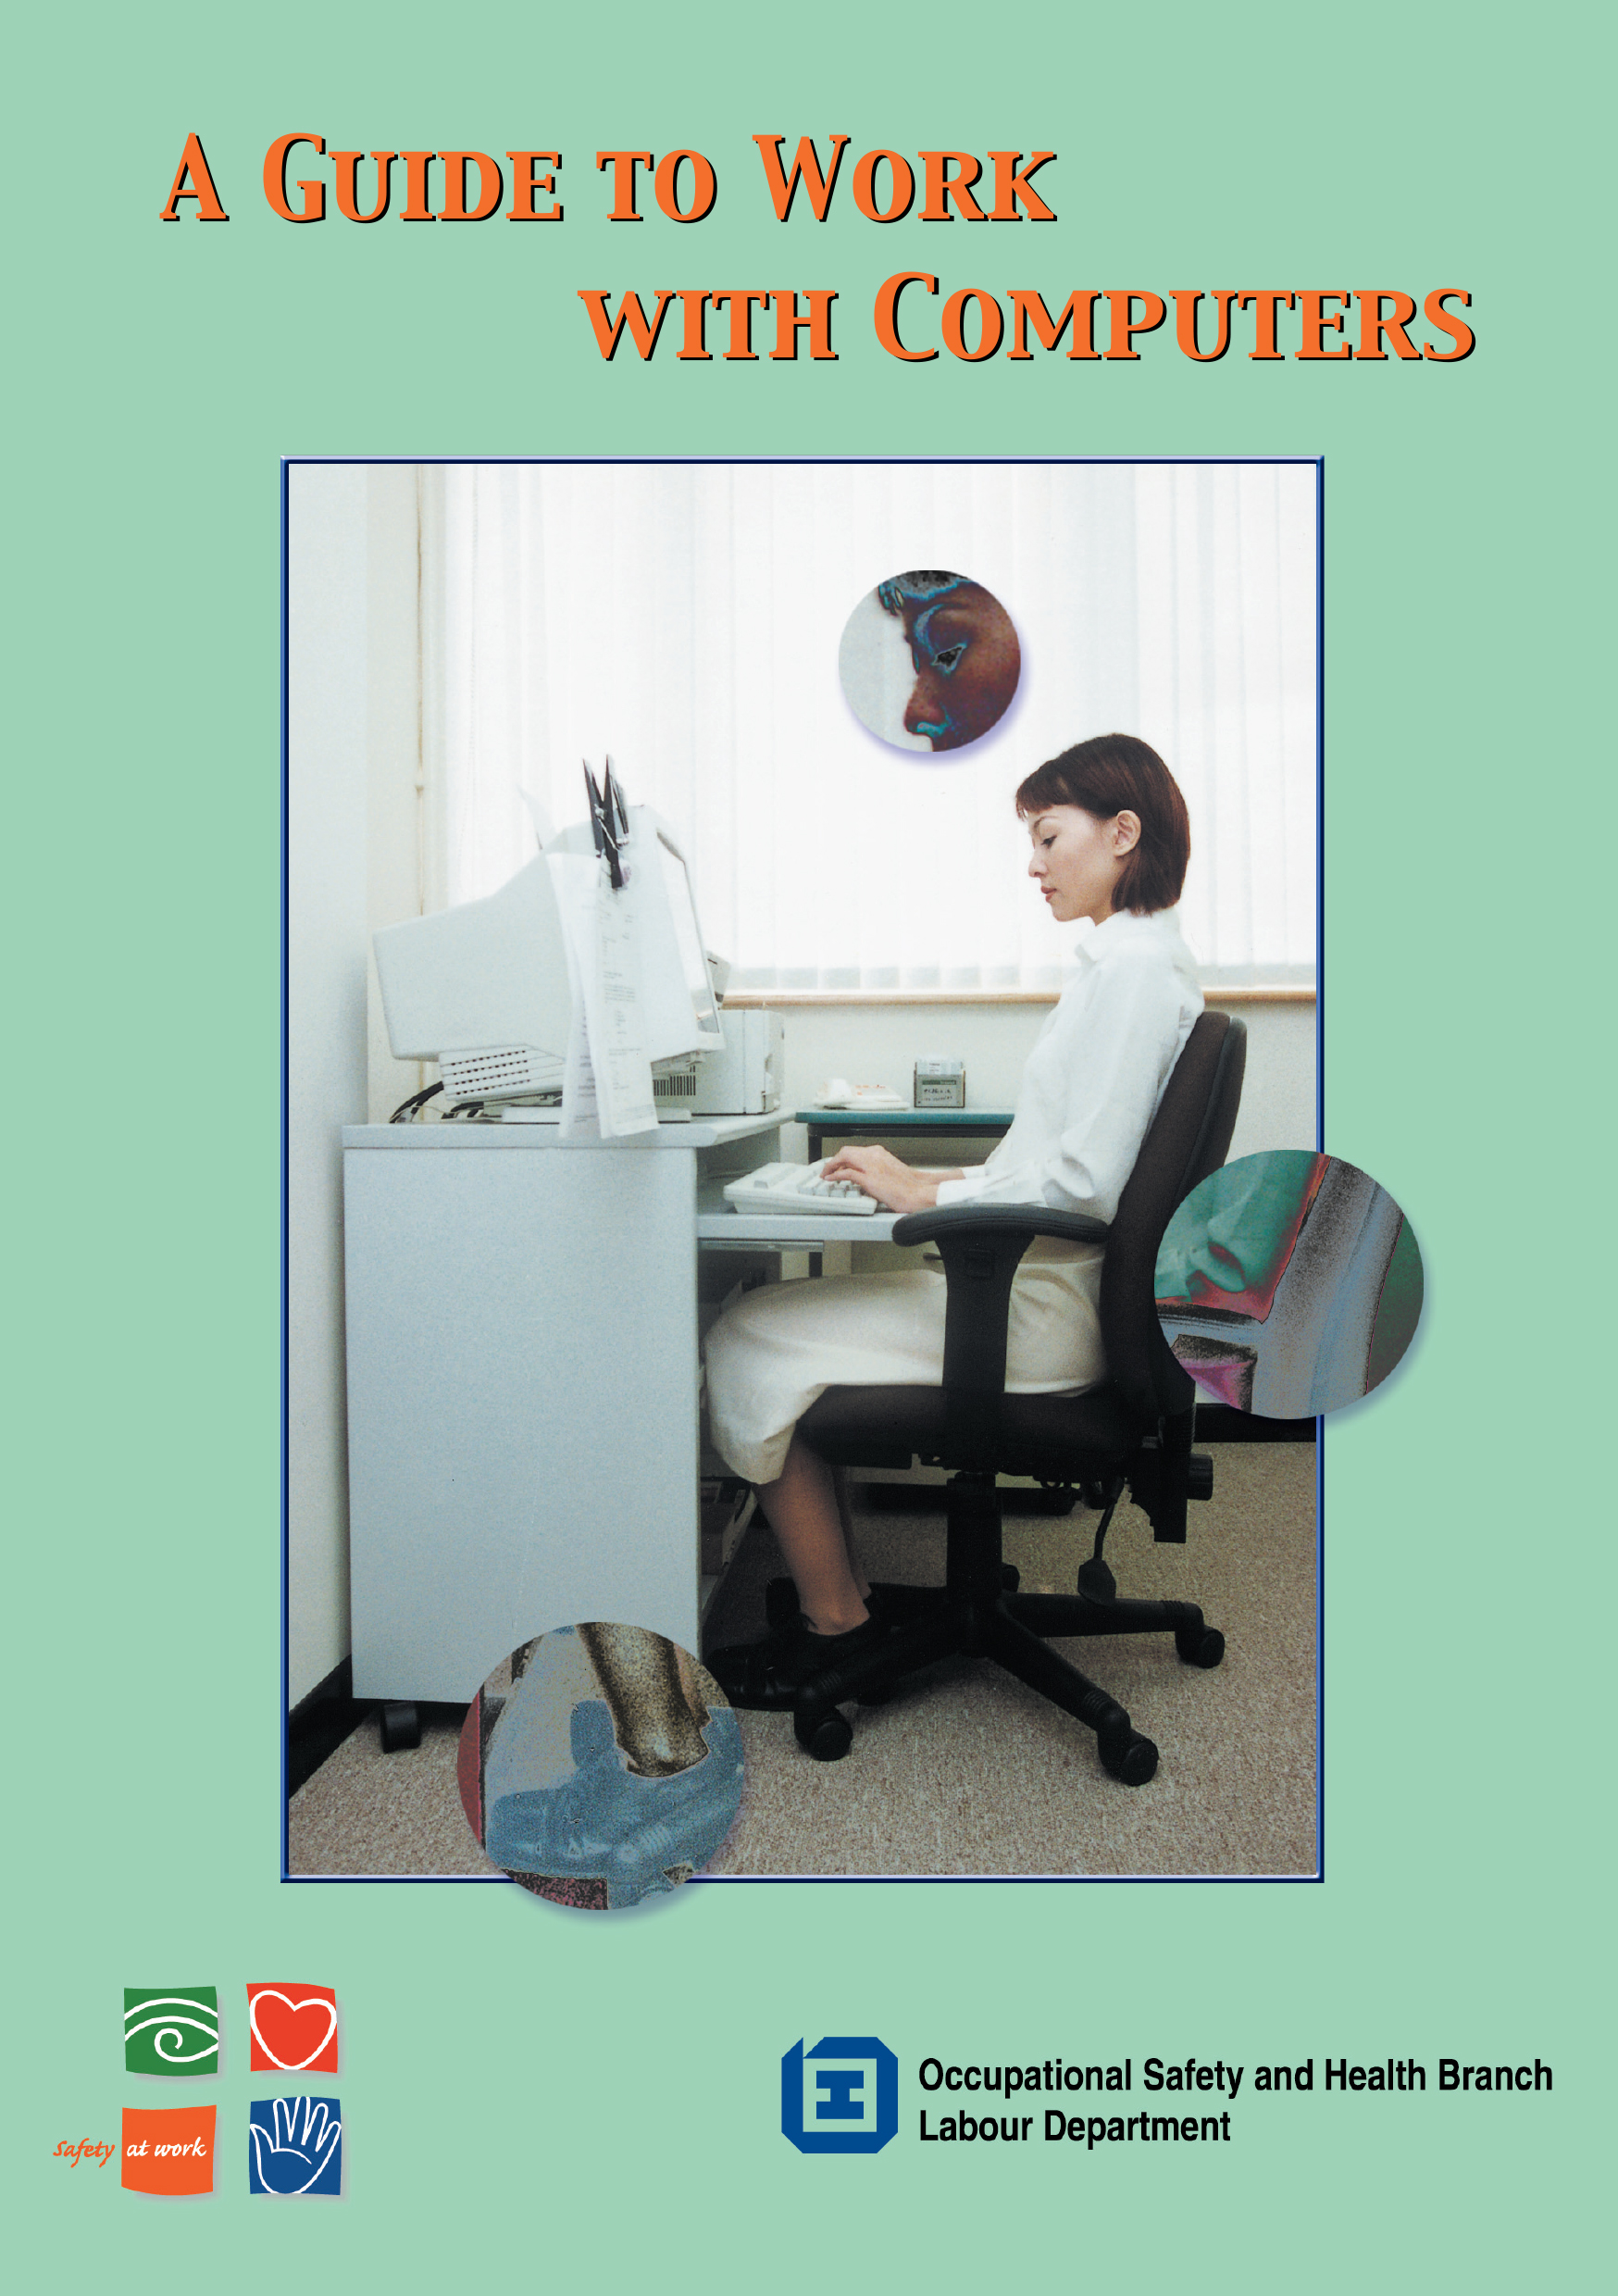 A Guide to Work with Computers (published by the Labour Department)